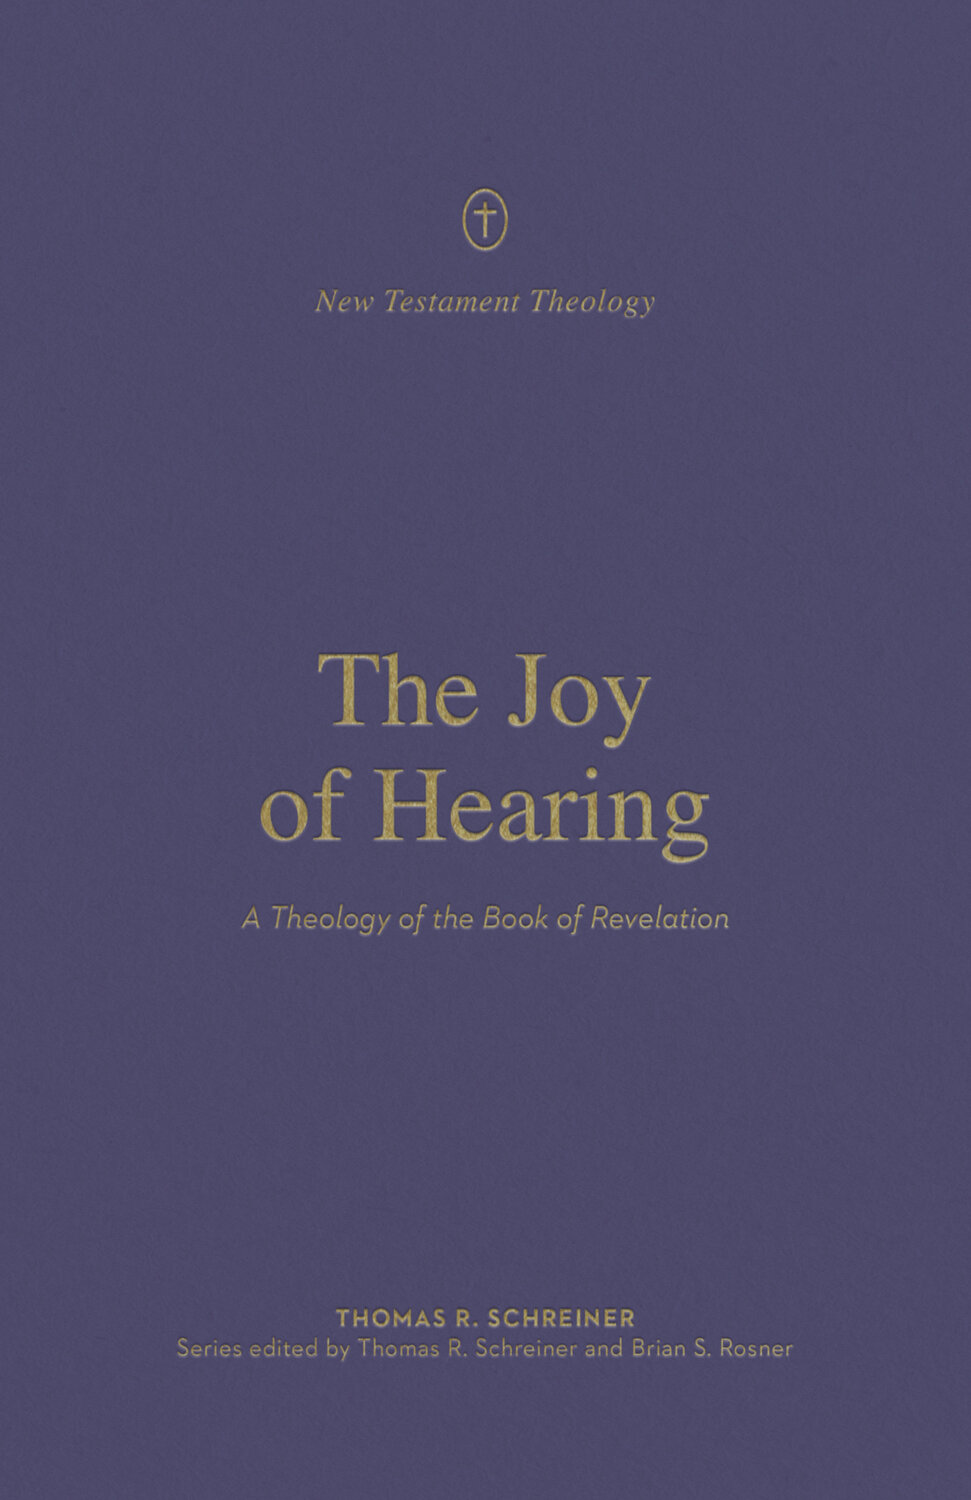 The Joy of Hearing: A Theology of the Book of Revelation (New Testament Theology)